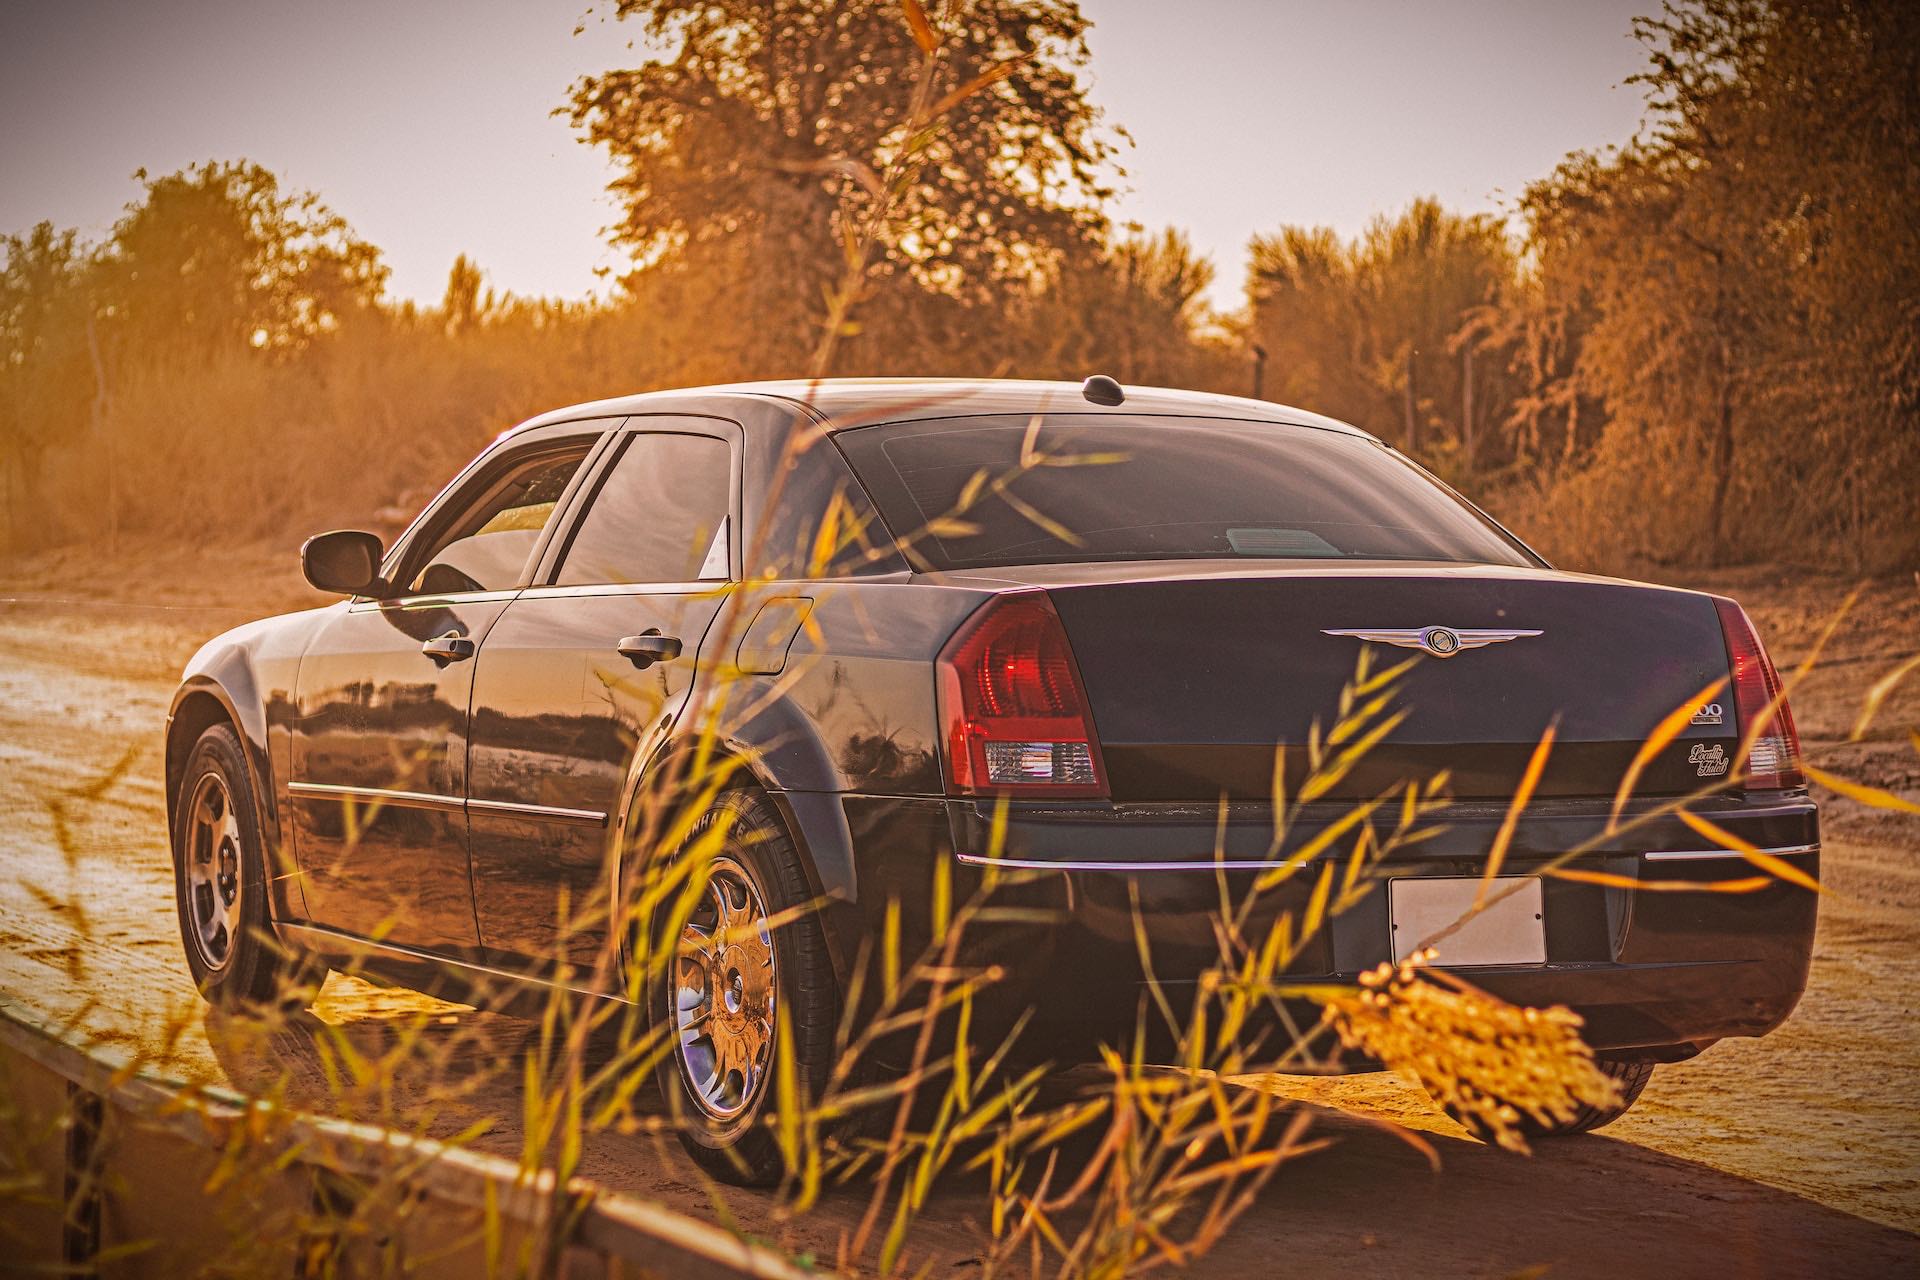 The Rise and Fall of the Iconic Chrysler 300: A Chapter Ends